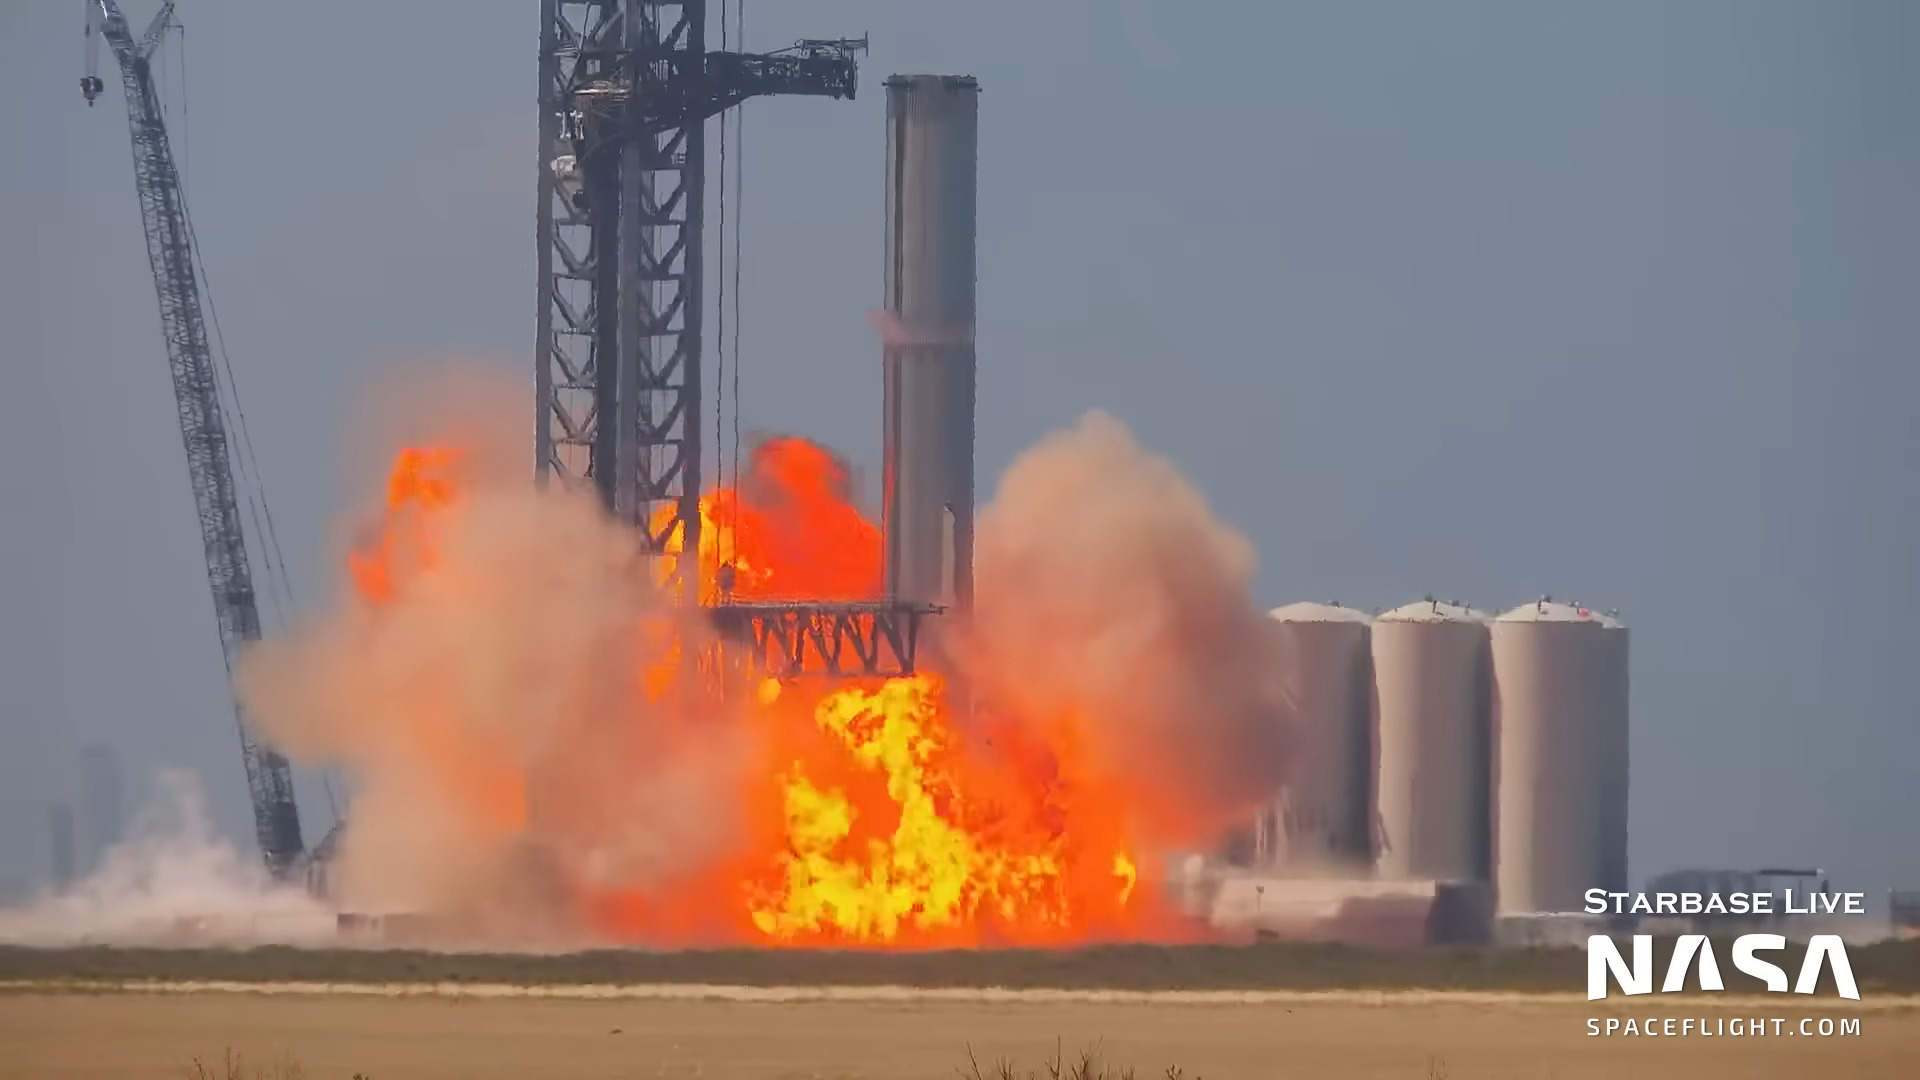 SpaceX: The spacecraft test ends with a huge explosion

